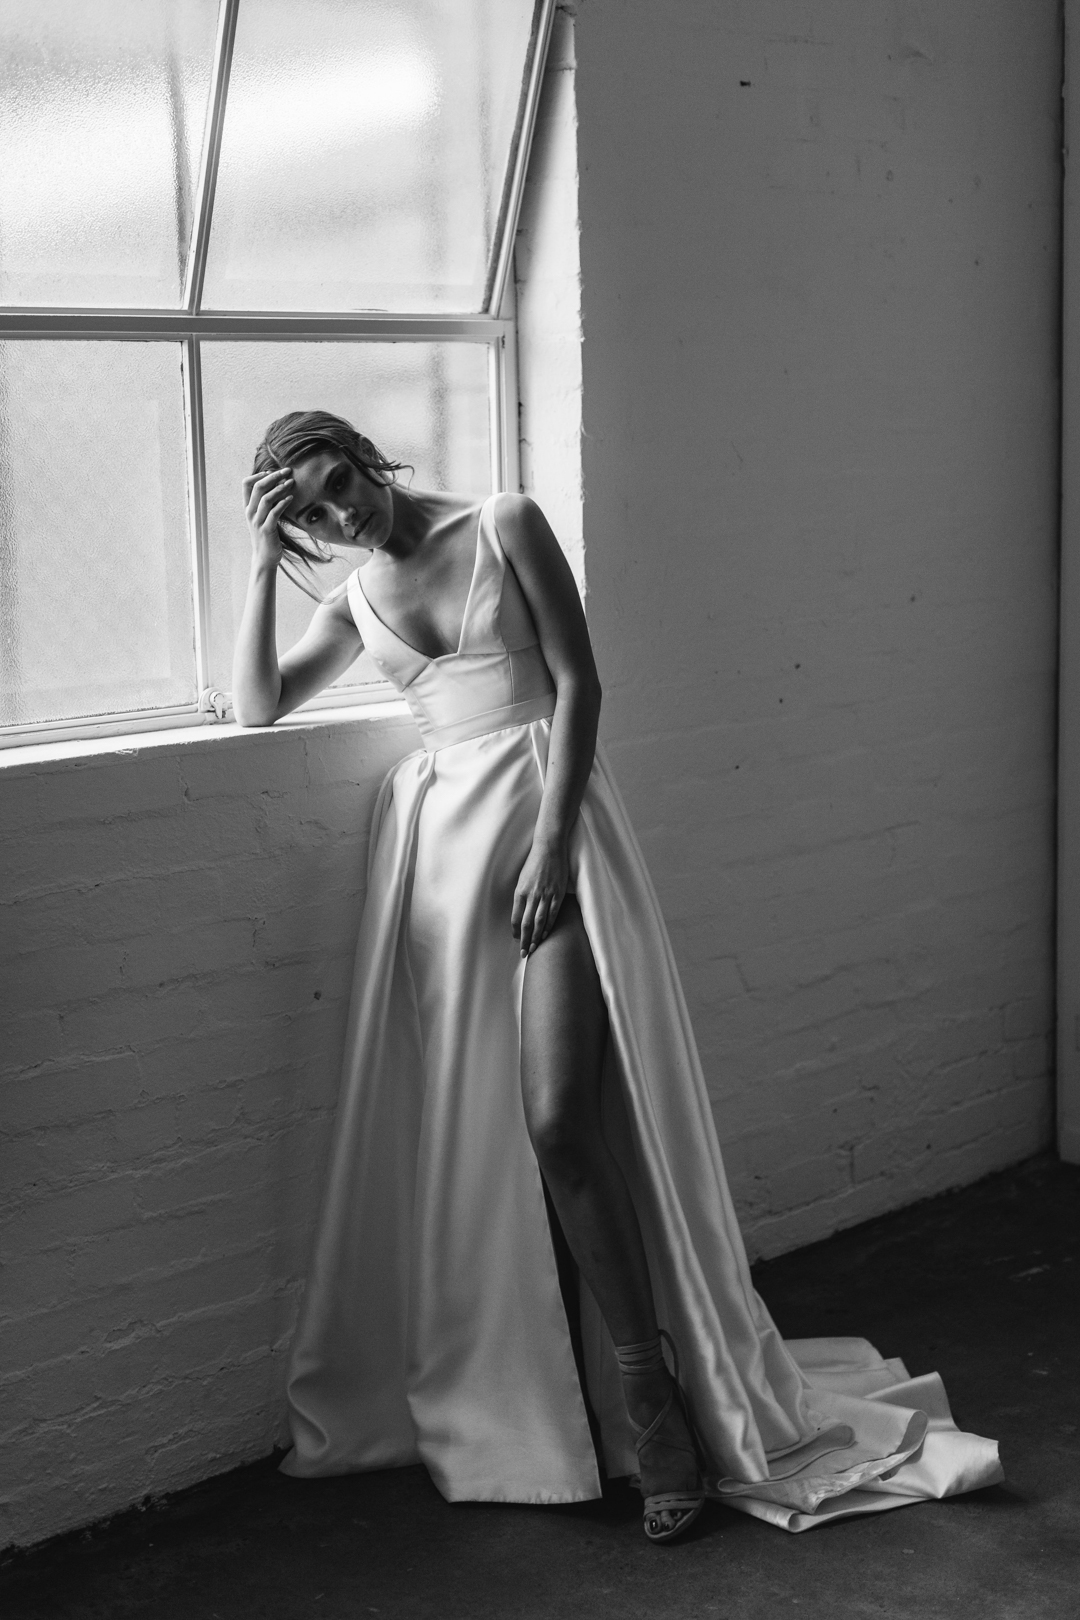 Sophisticated and feminie wedding gowns for an elegant bride.